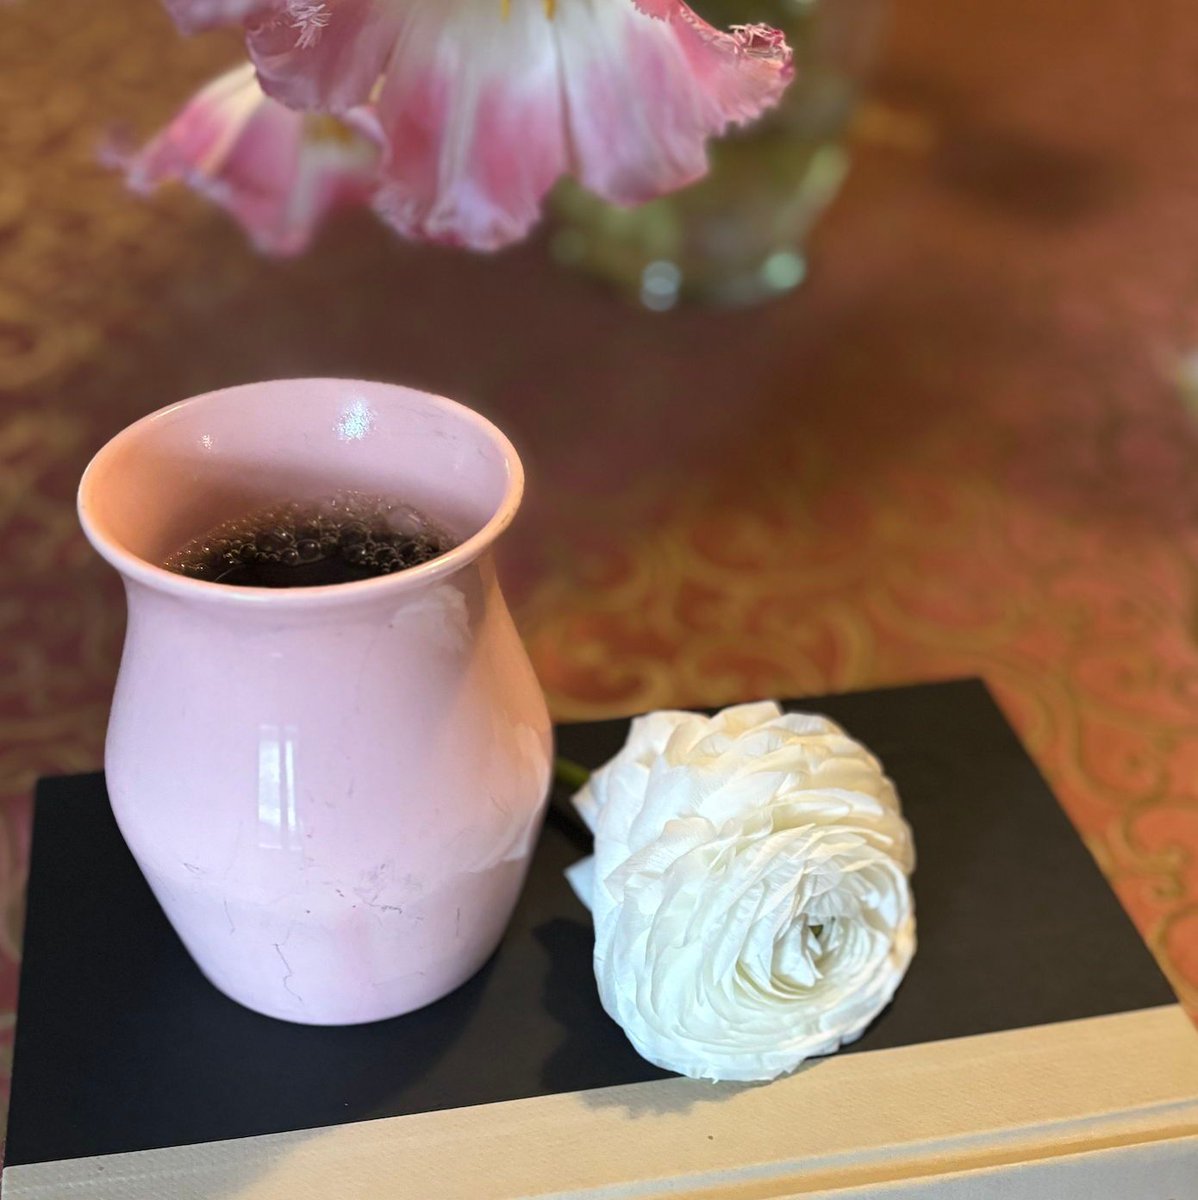 Naturally smooth and sweet, our elegant medium-roasted Tapestry Blend is a wonderful compliment to any spring day. 15% off your first order with code FT15: buff.ly/3QOt3GY 

#thequeenbean #coffee #tgif #coffeelover